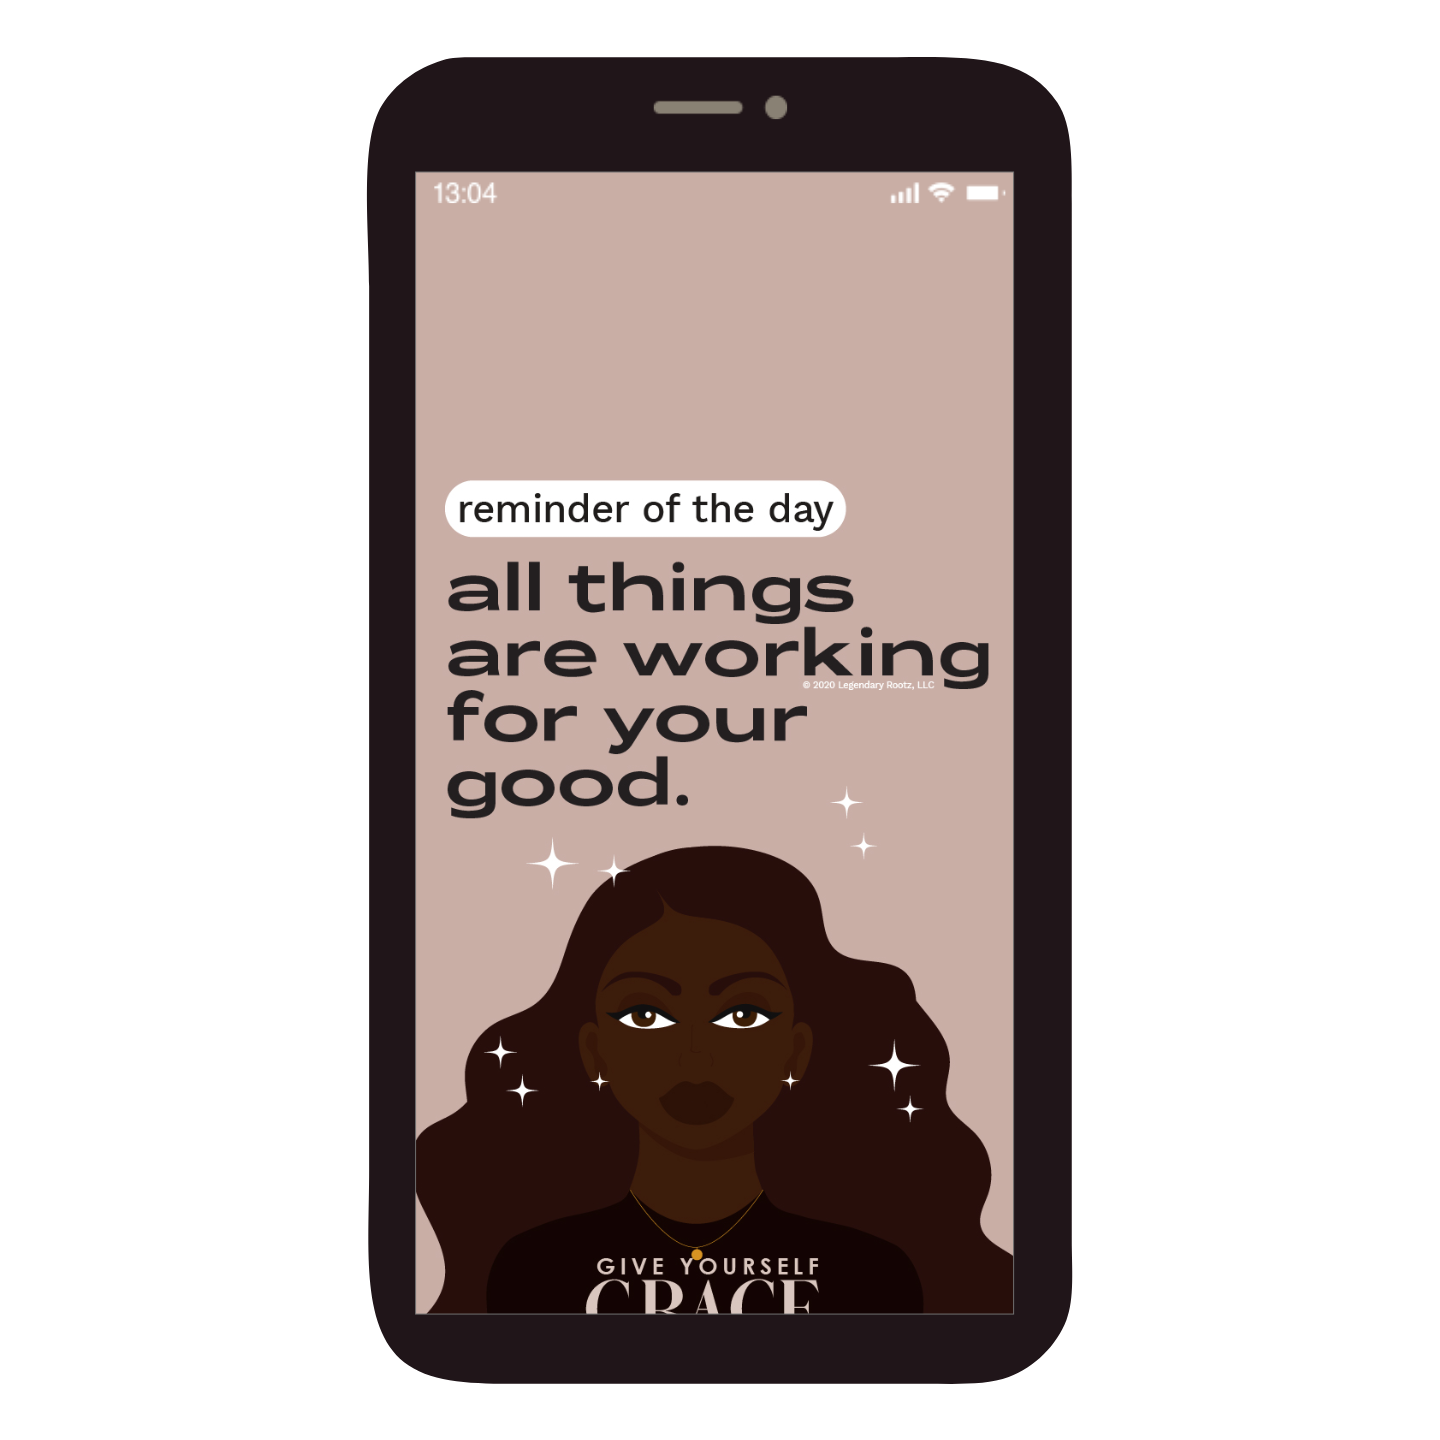 Reminder Of The Day: All Things Are Working | Wallpaper Pack